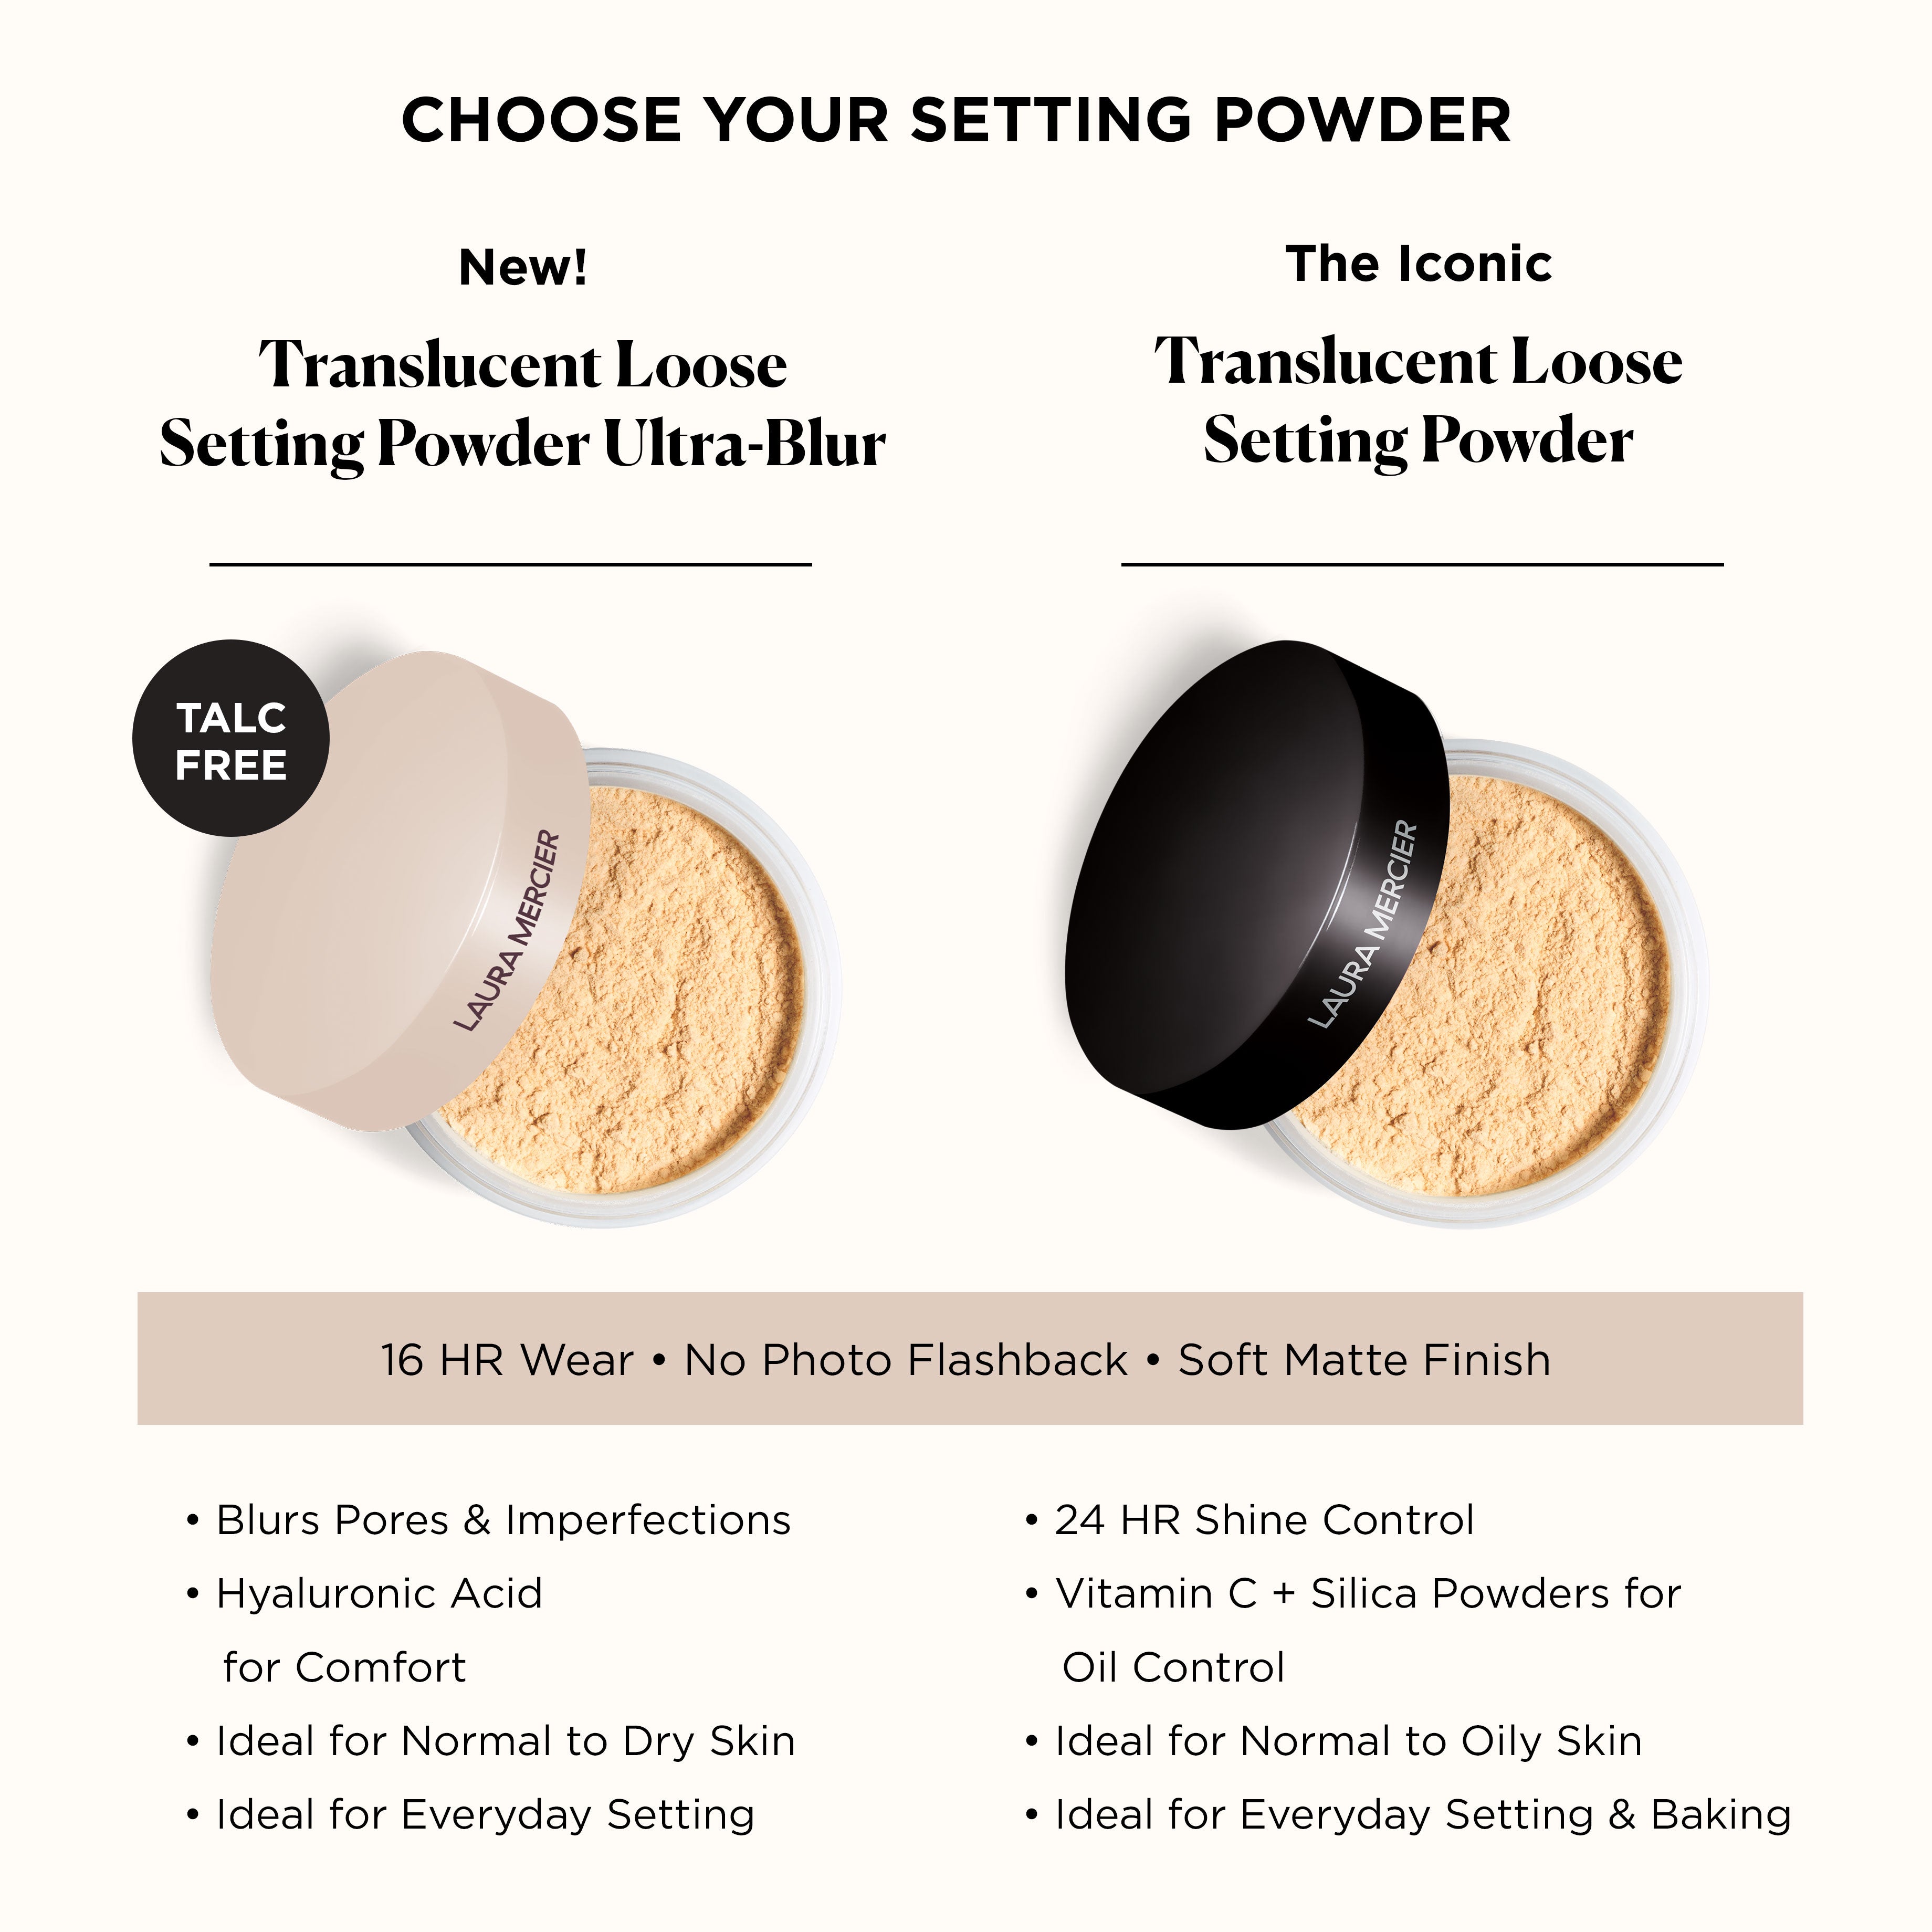 17 Best Setting Powders for Dry Skin to Keep Your Makeup Seamless